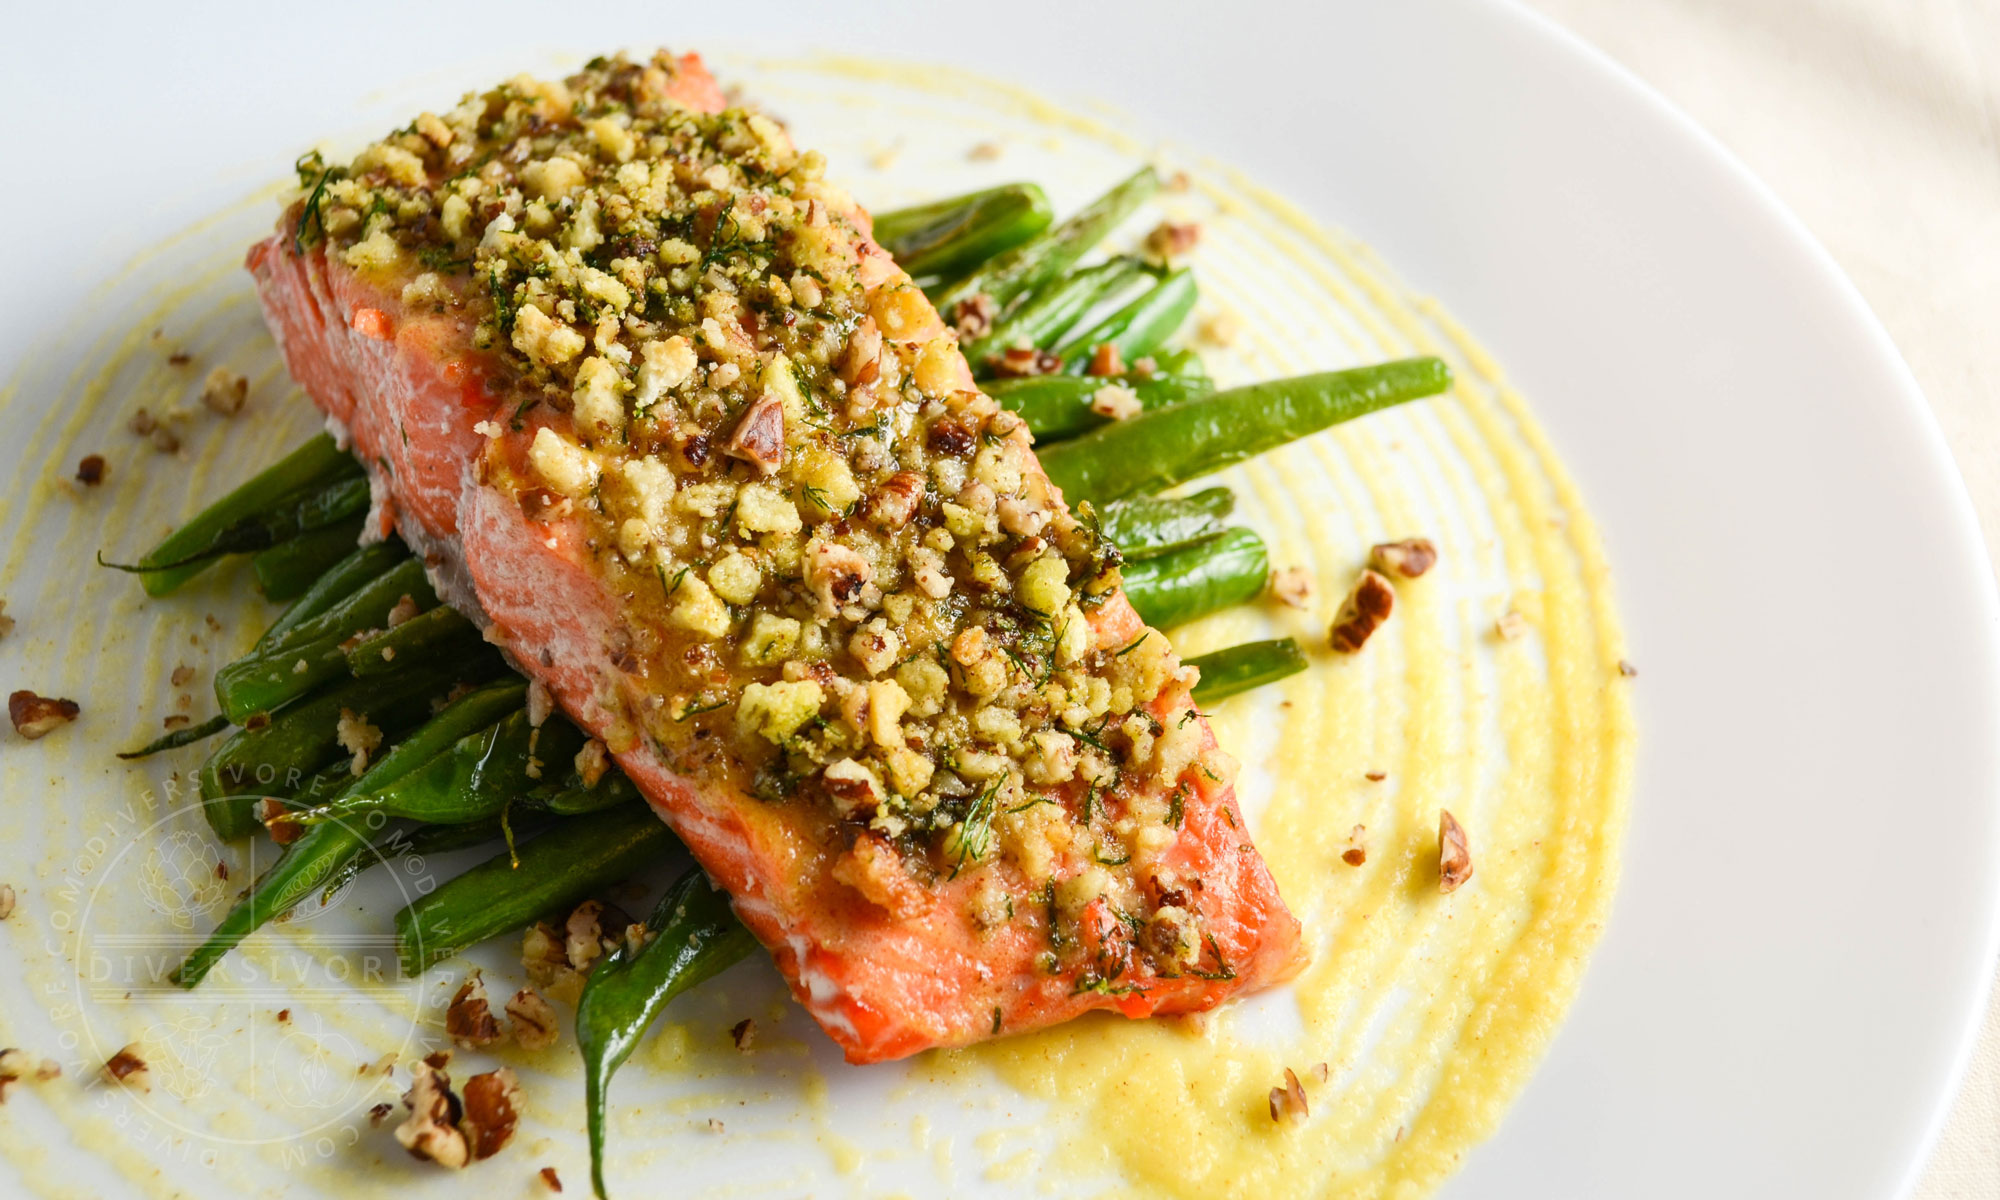 Honey and Dijon Baked Salmon with Pecans, served on a bed of green beans